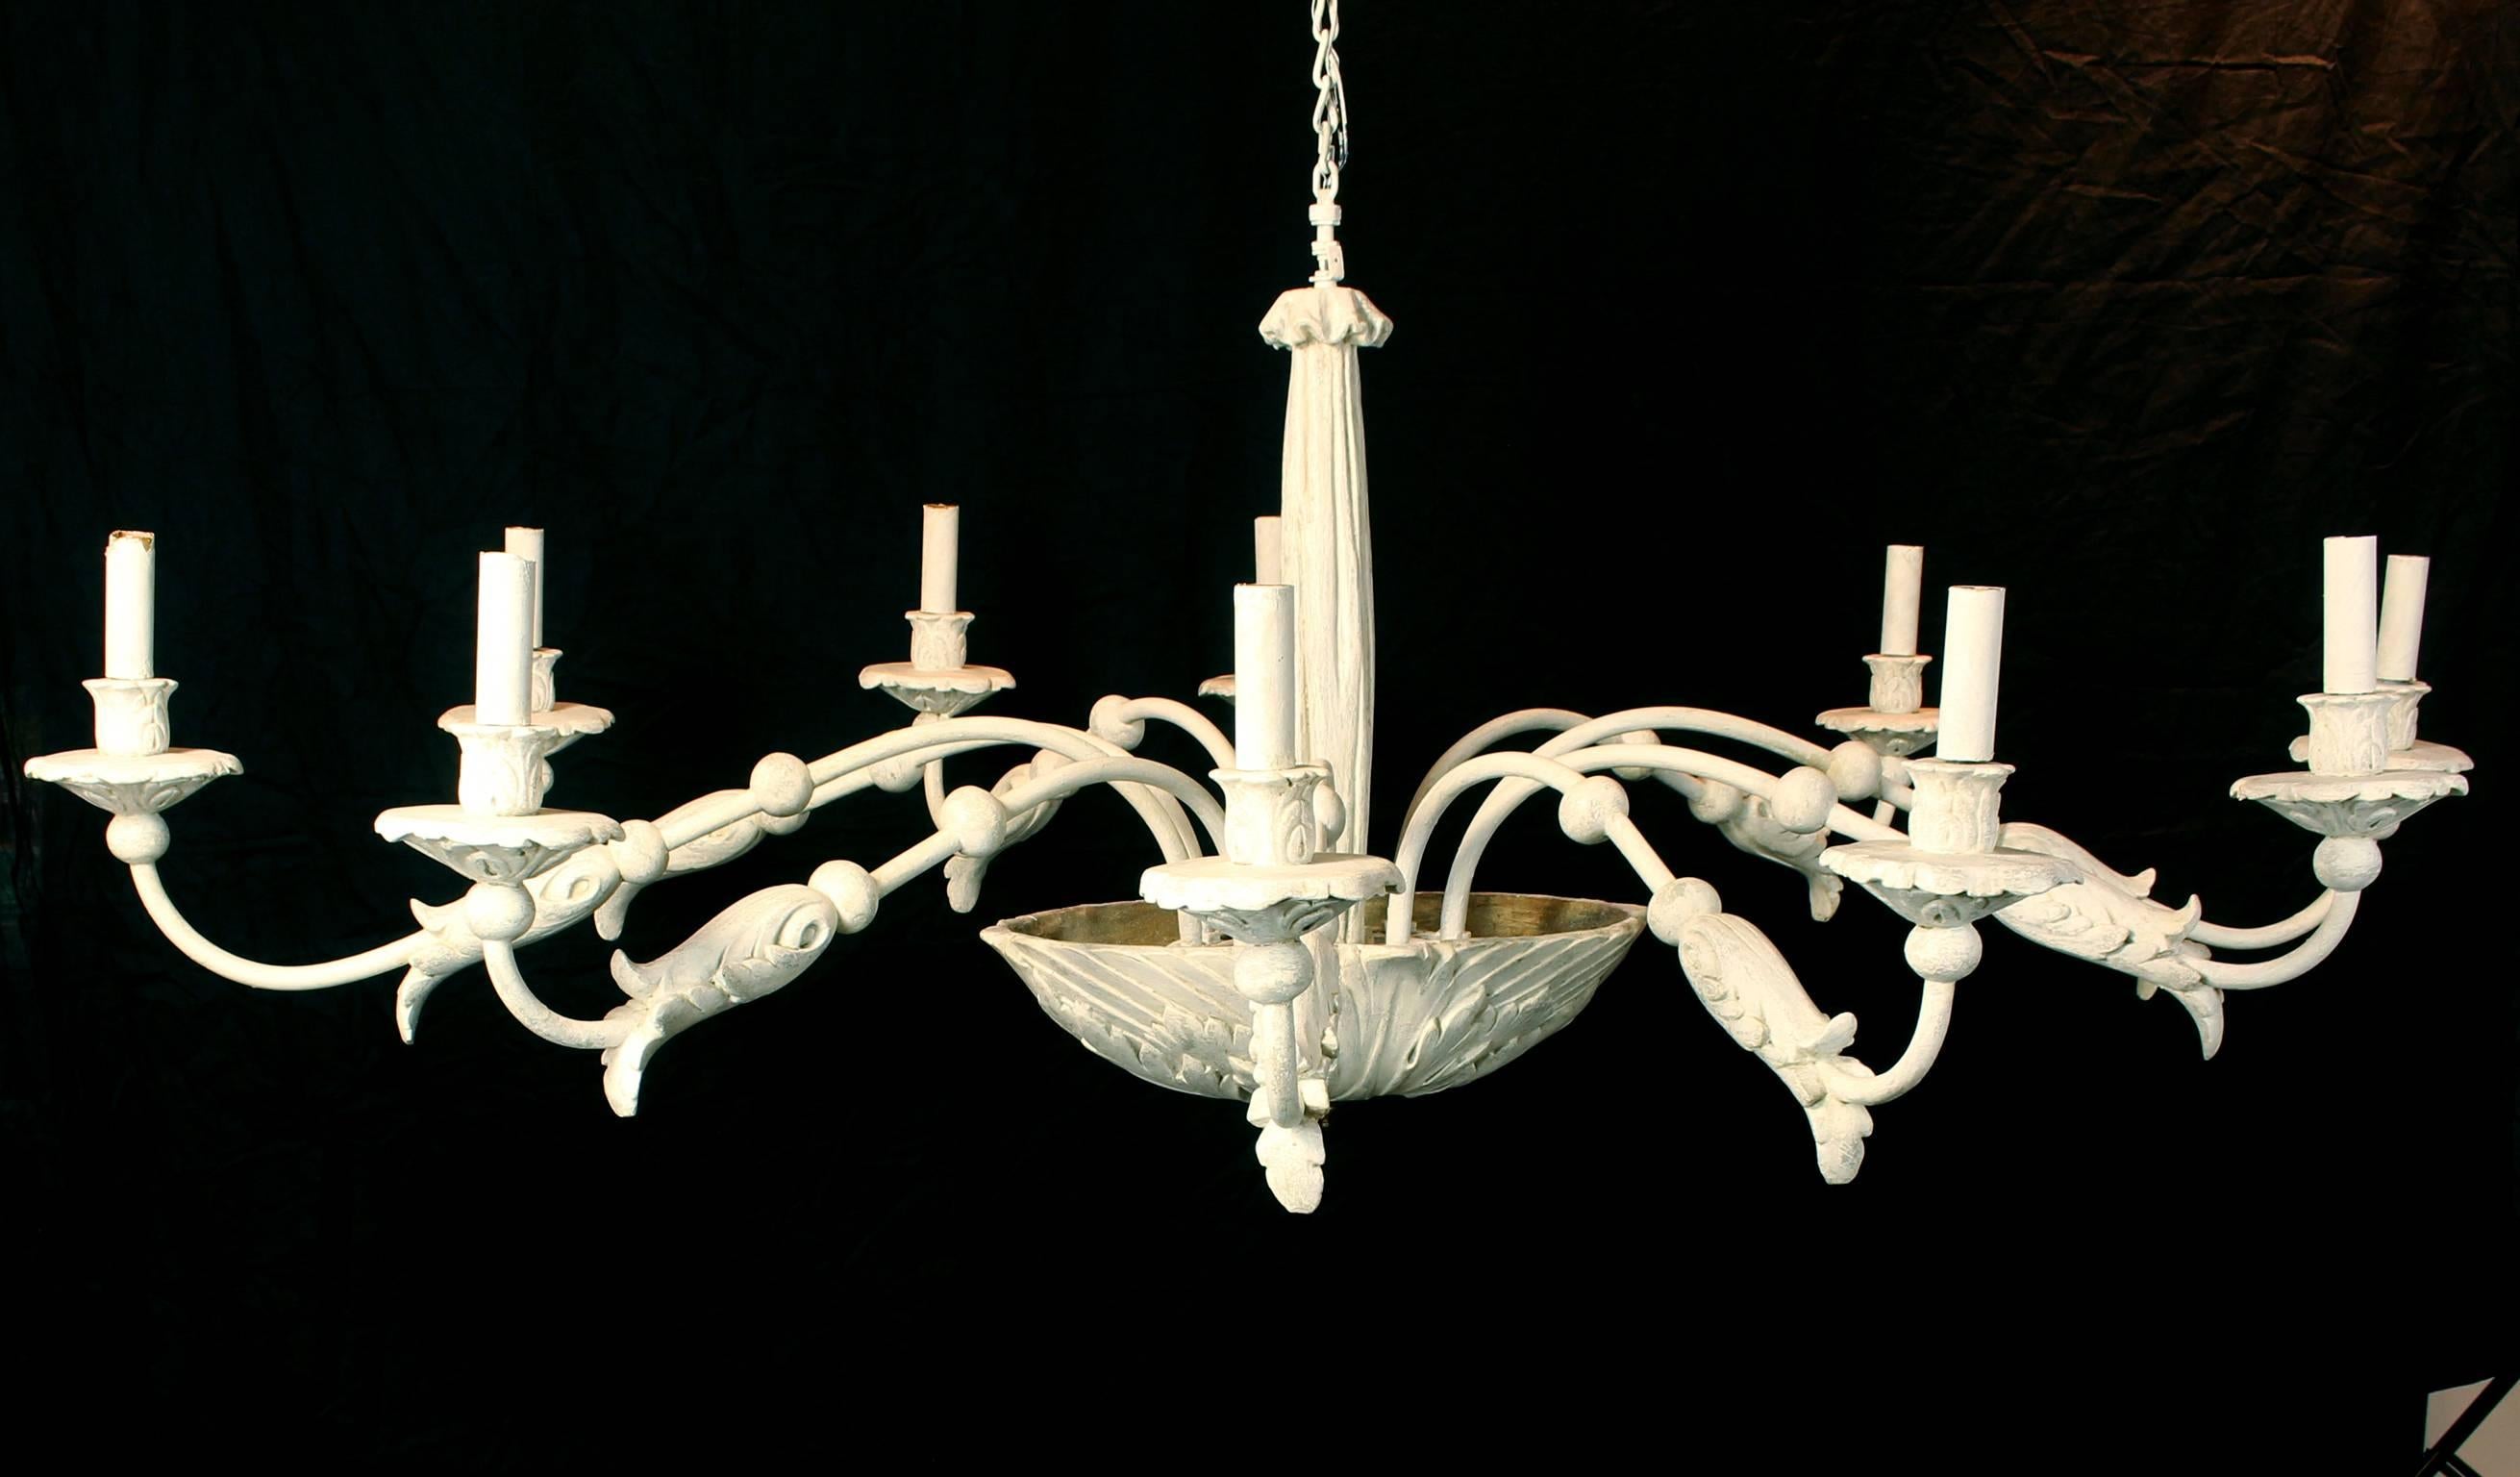 An exceptionally large pale grey plaster ten-arm chandelier in the style of Sirmos dating from the mid-1970s.